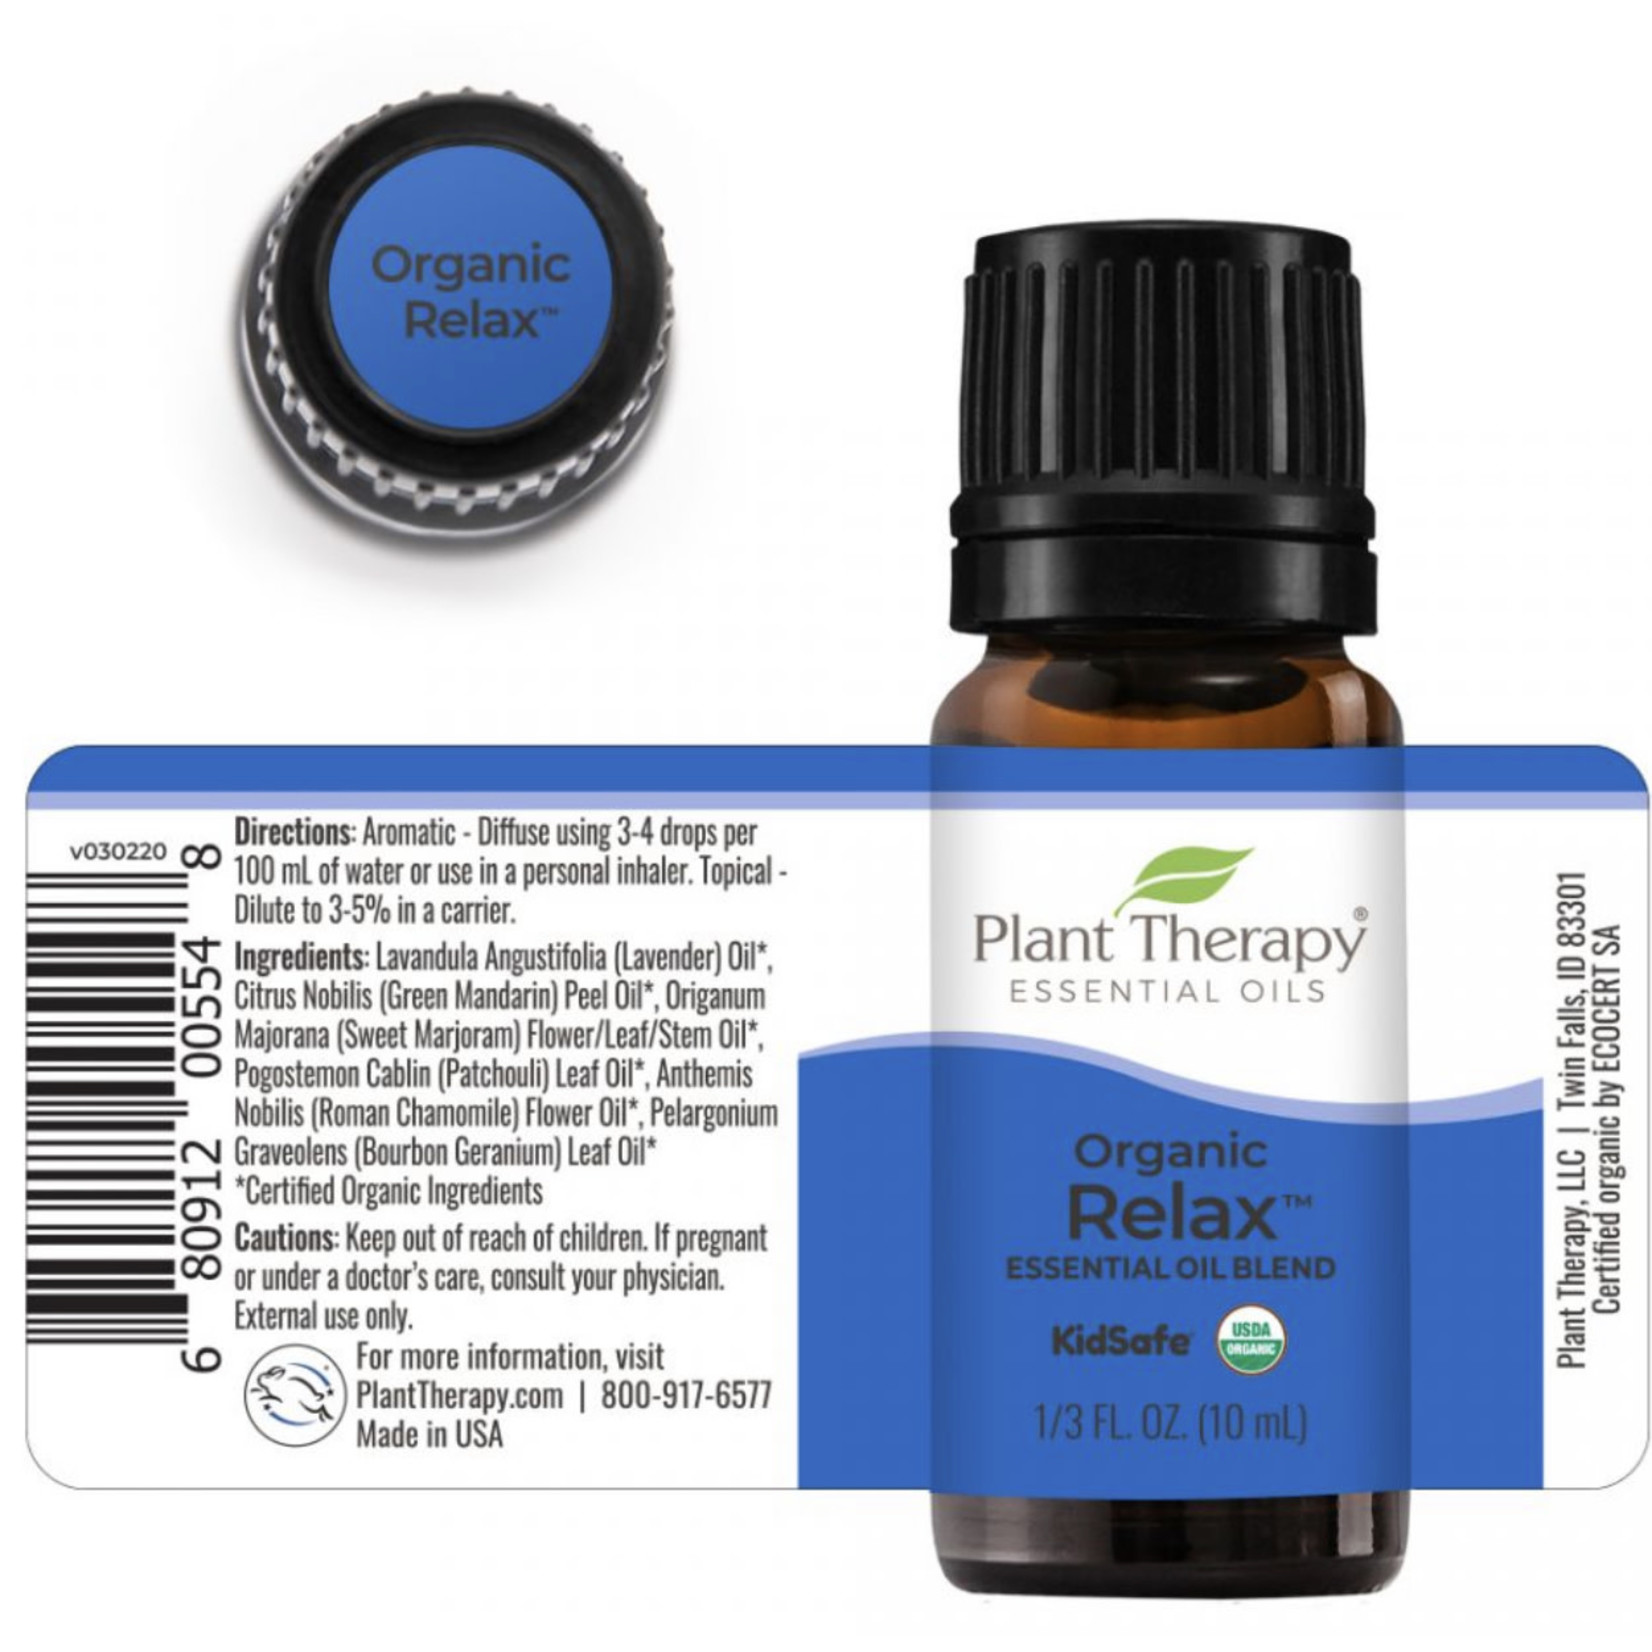 Plant Therapy Organic Relax Essential Oil Blend